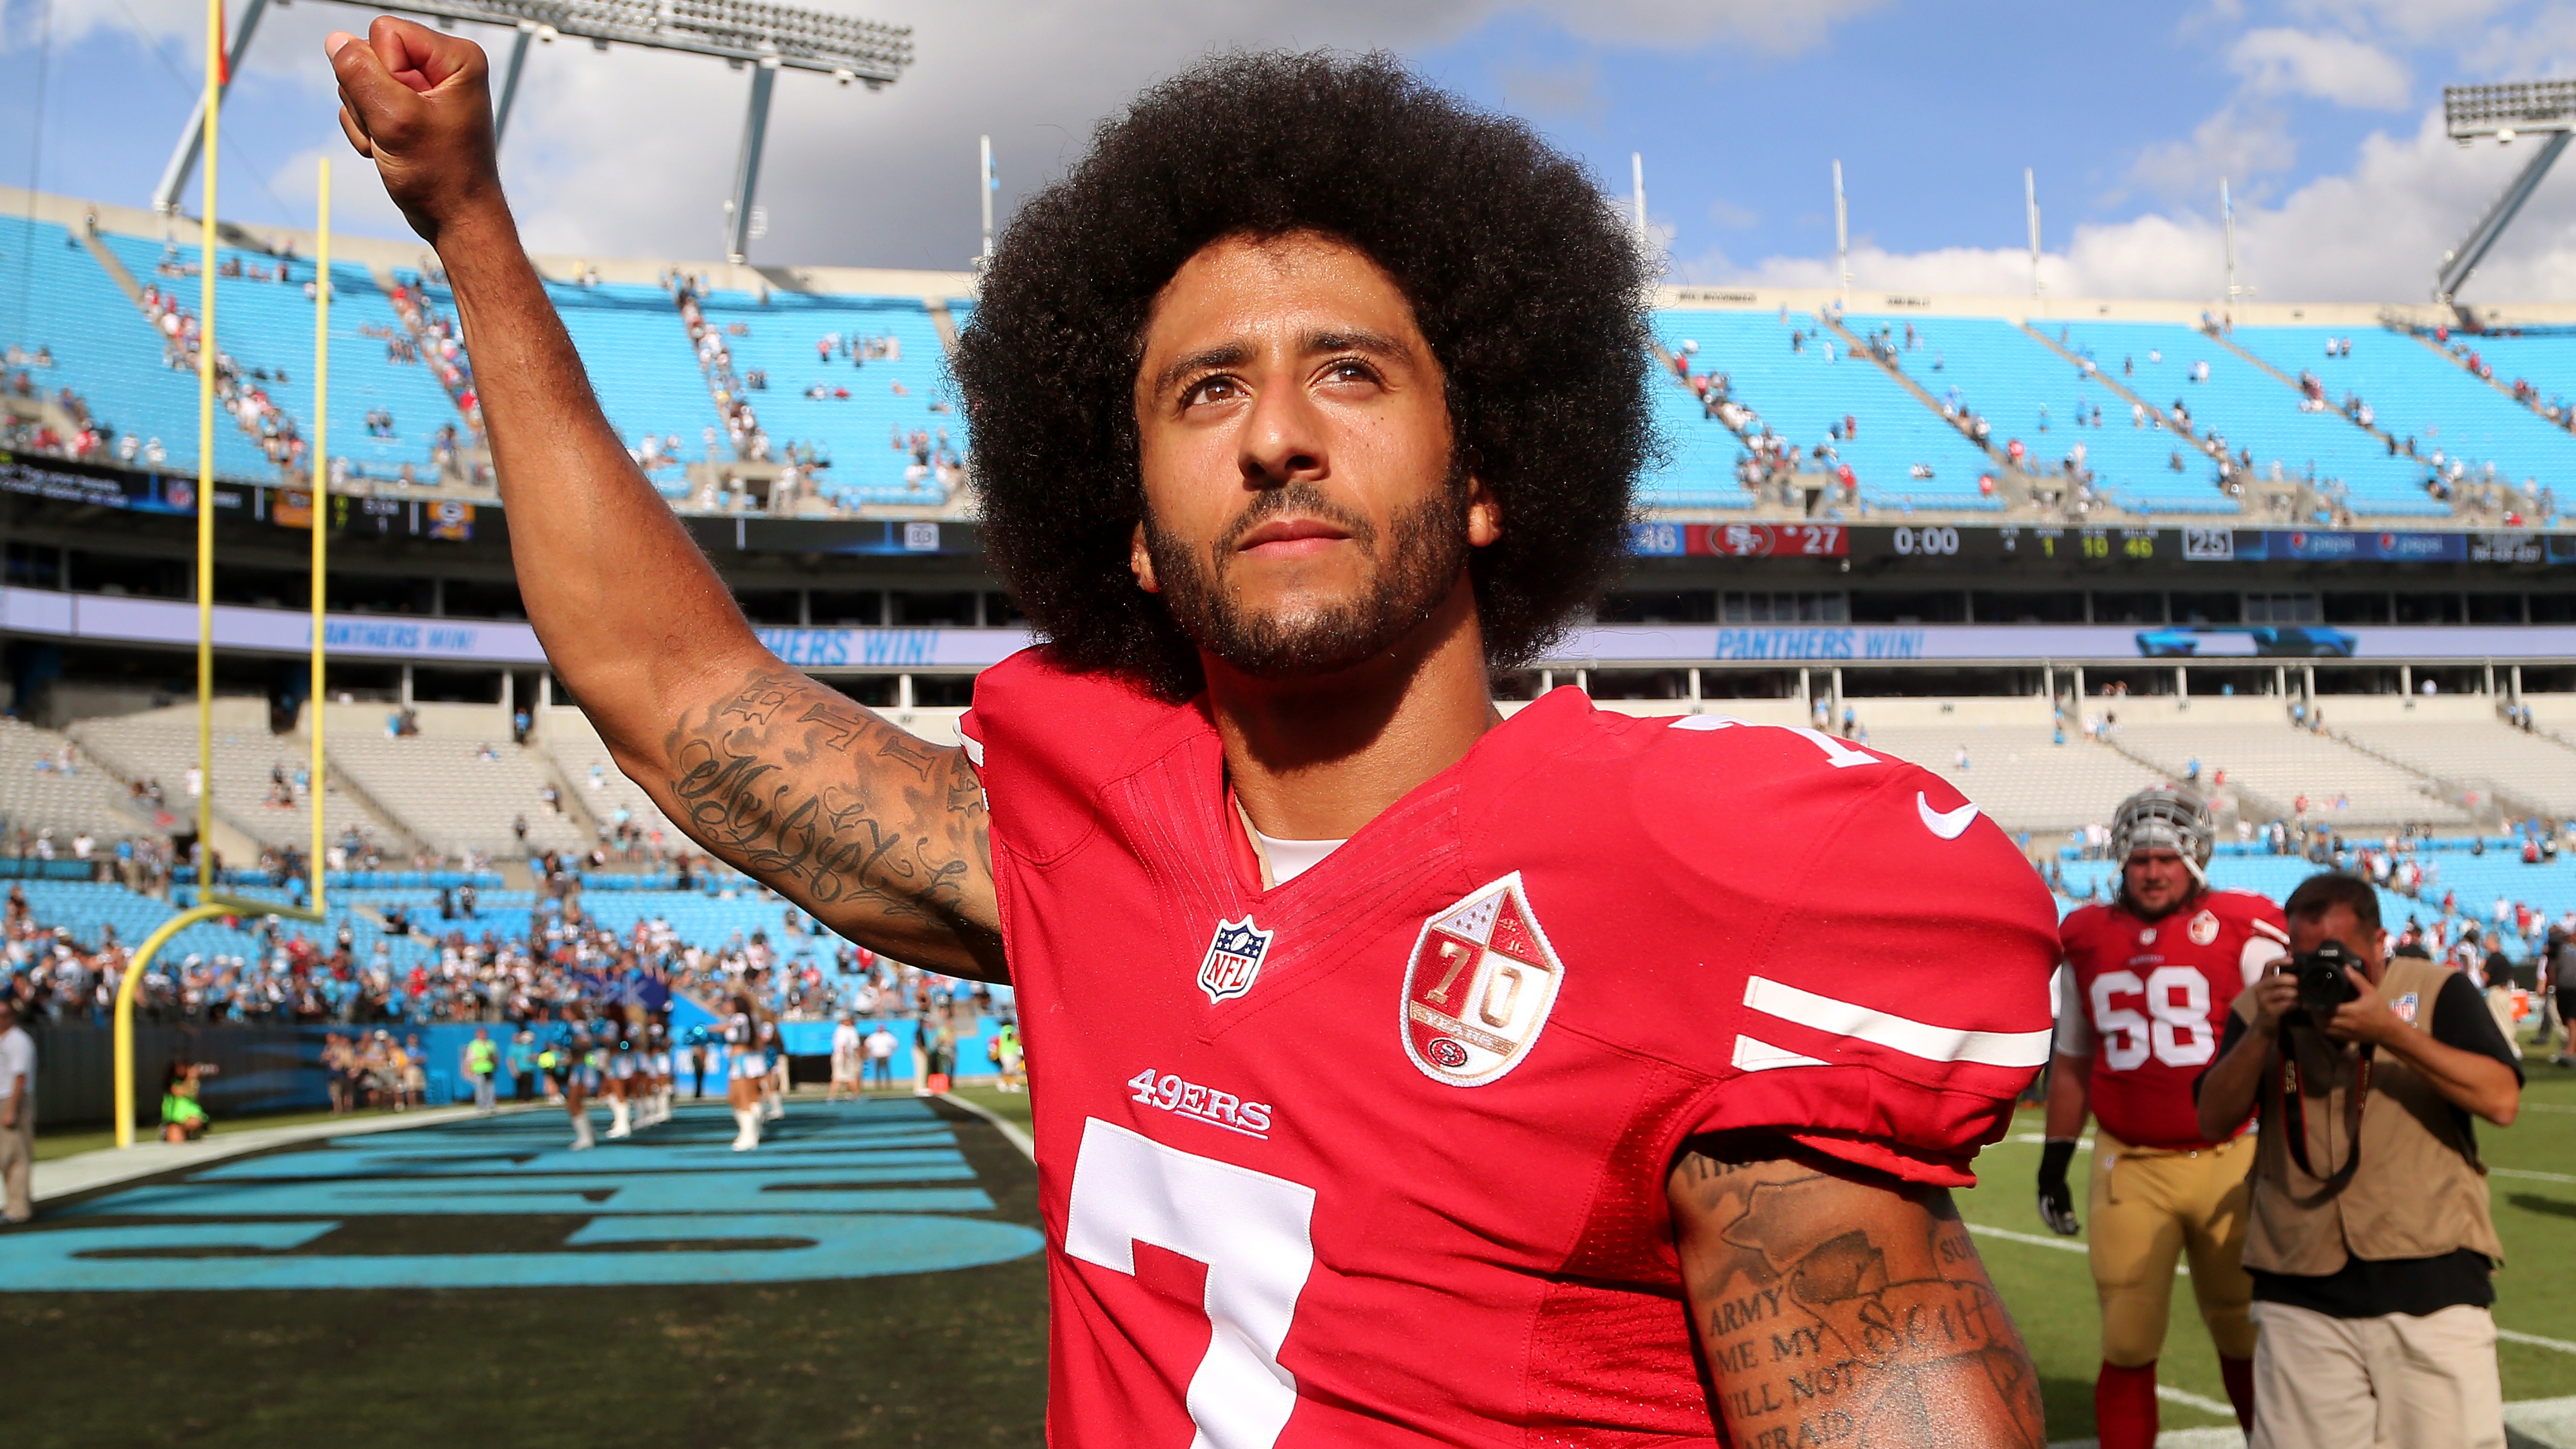 Fans react to possibility of Ravens signing quarterback Colin Kaepernick